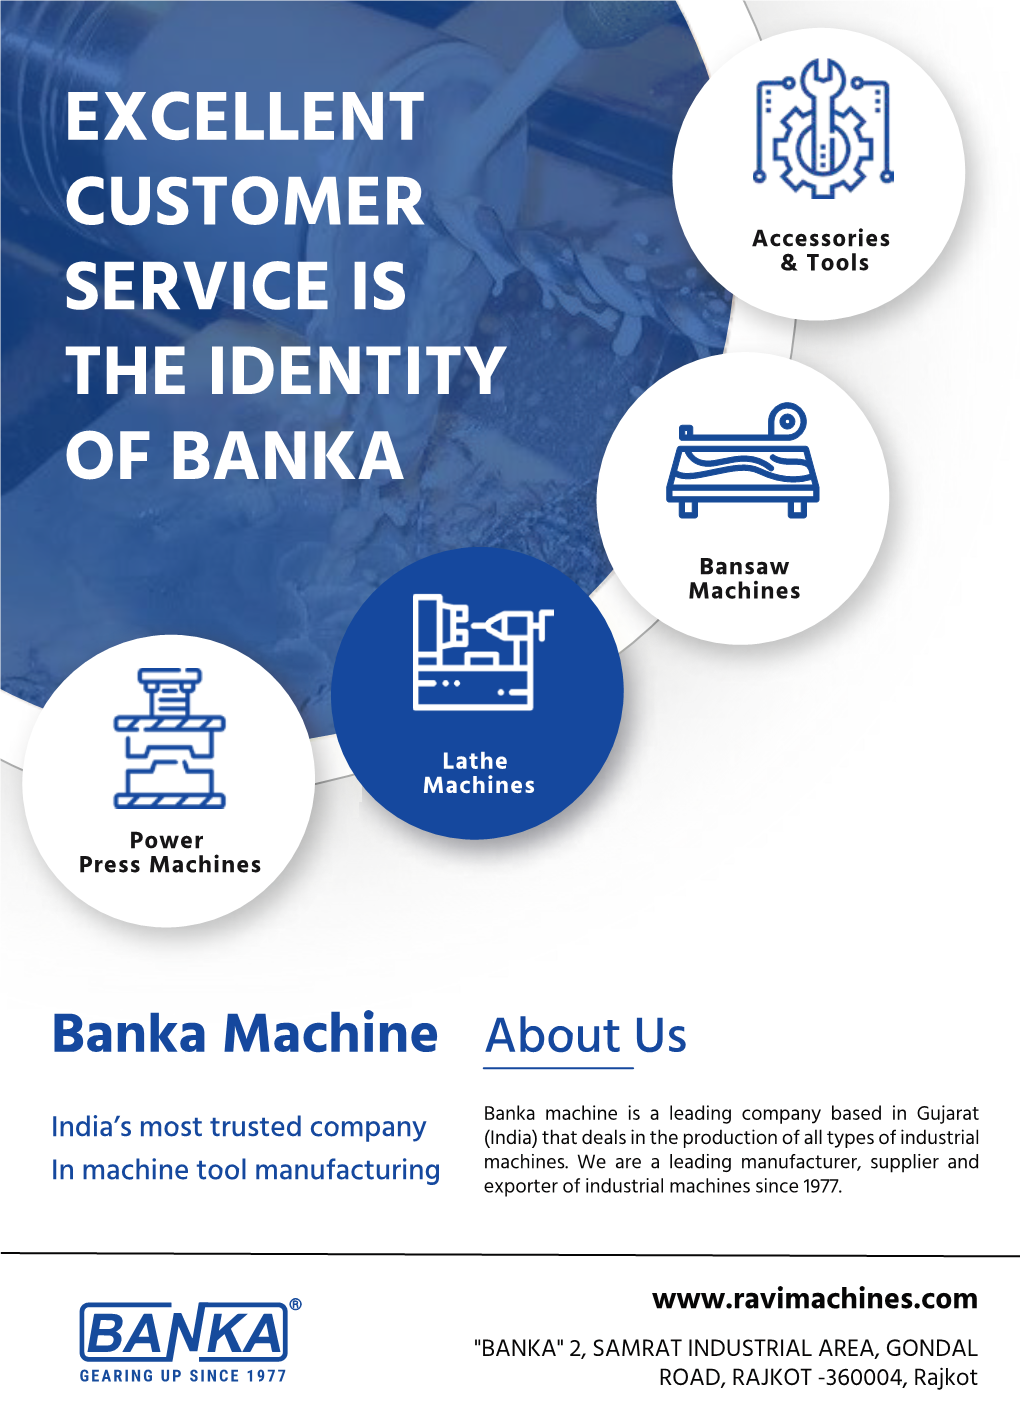 Excellent Customer Service Is the Identity of Banka